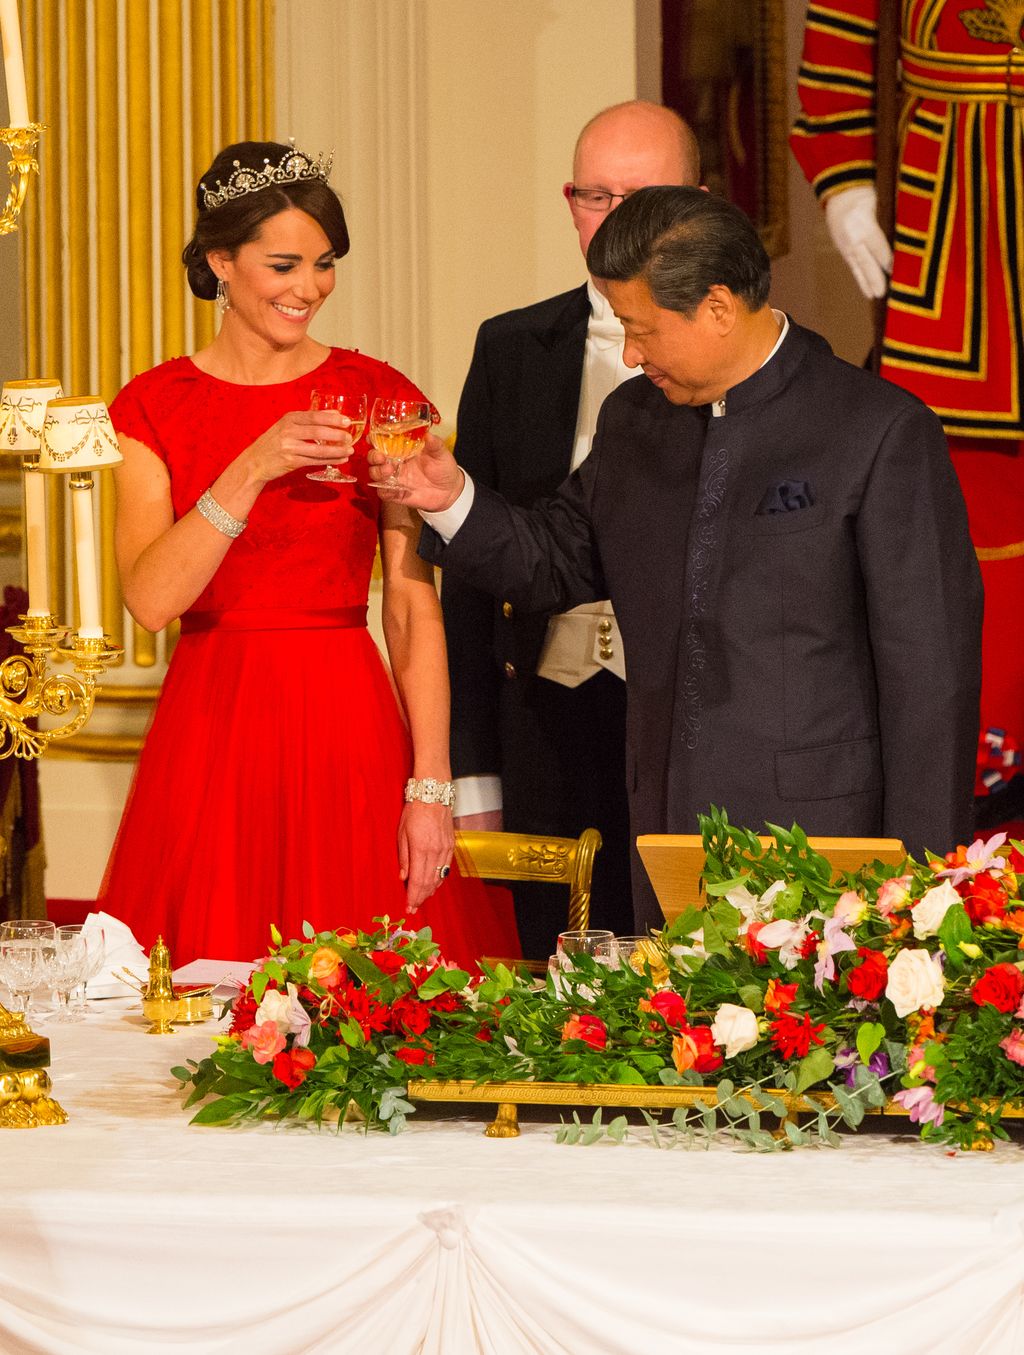 LONDON, ENGLAND - OCTOBER 20:  Chinese President Xi Jinping and Catherine, Duchess of Cambridge attend a state banquet at Buckingham Palace on October 20, 2015 in London, England. The President of the People's Republic of China, Mr Xi Jinping and his wife, Madame Peng Liyuan, are paying a State Visit to the United Kingdom as guests of the Queen. They will stay at Buckingham Palace and undertake engagements in London and Manchester. The last state visit paid by a Chinese President to the UK was Hu Jintao in 2005.  (Photo by Dominic Lipinski - WPA Pool /Getty Images)